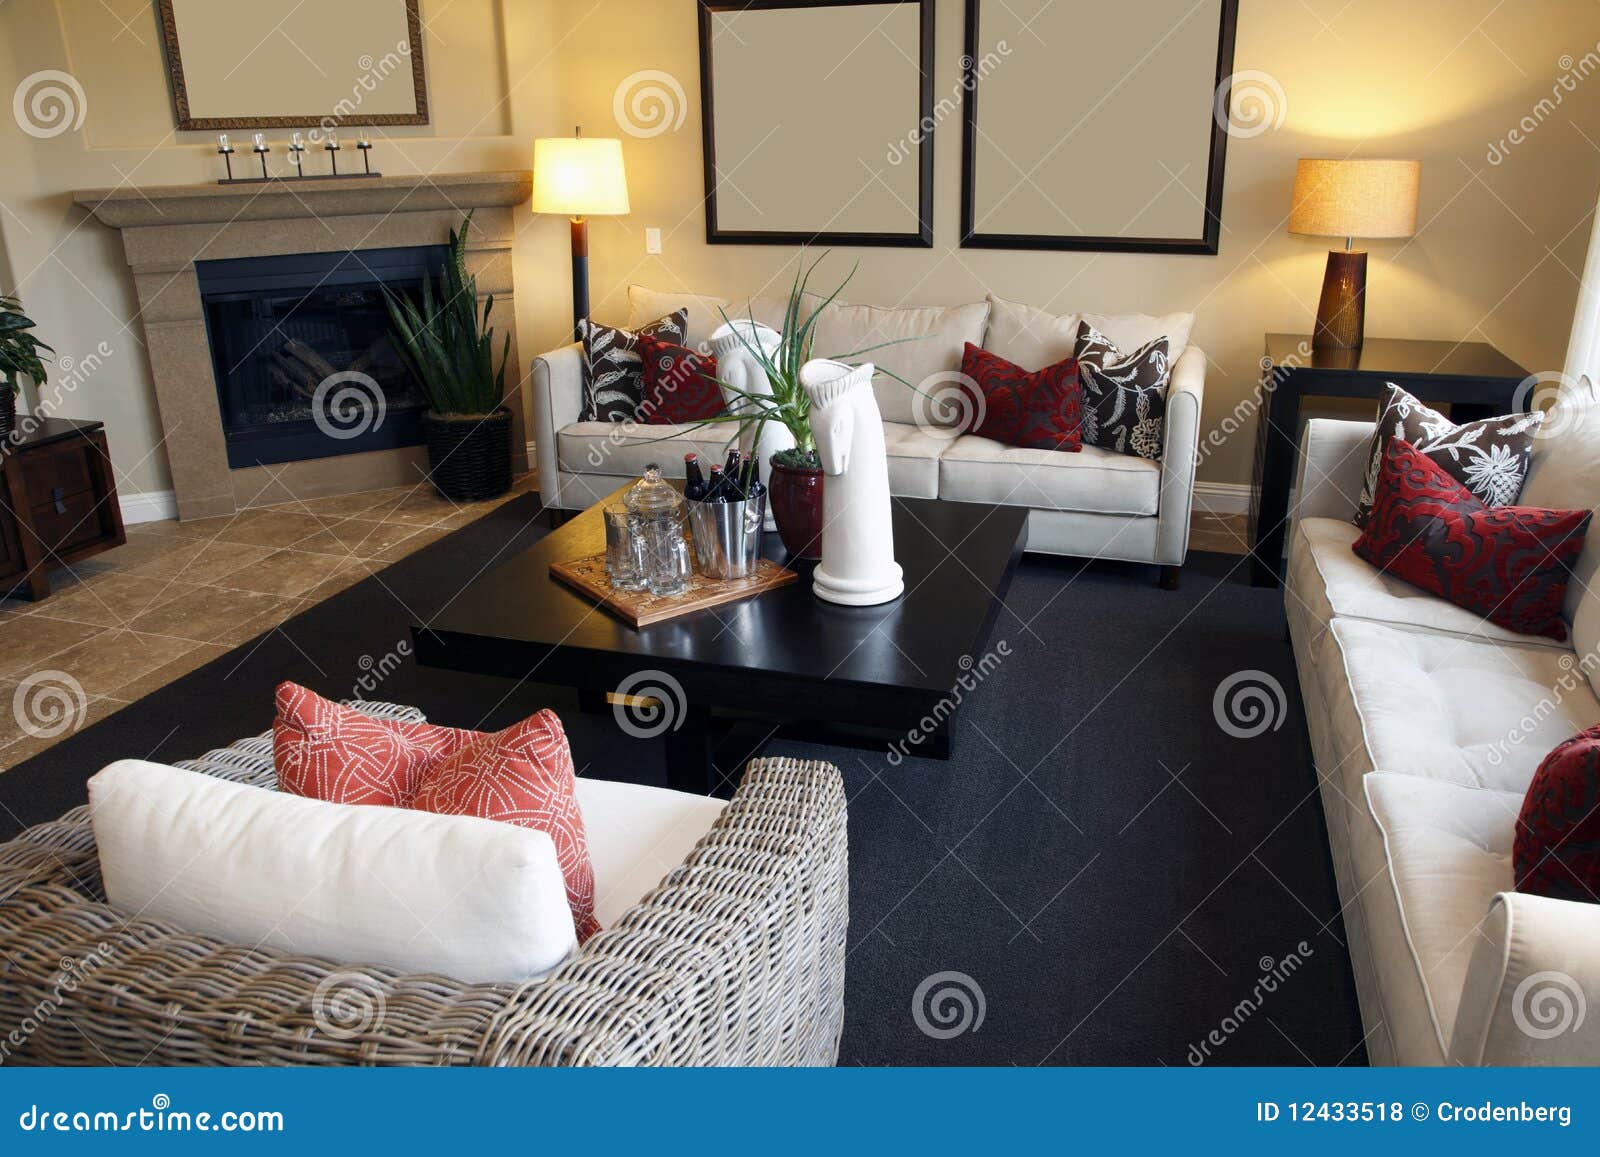 Spacious living room stock photo. Image of decor, mansion - 12433518